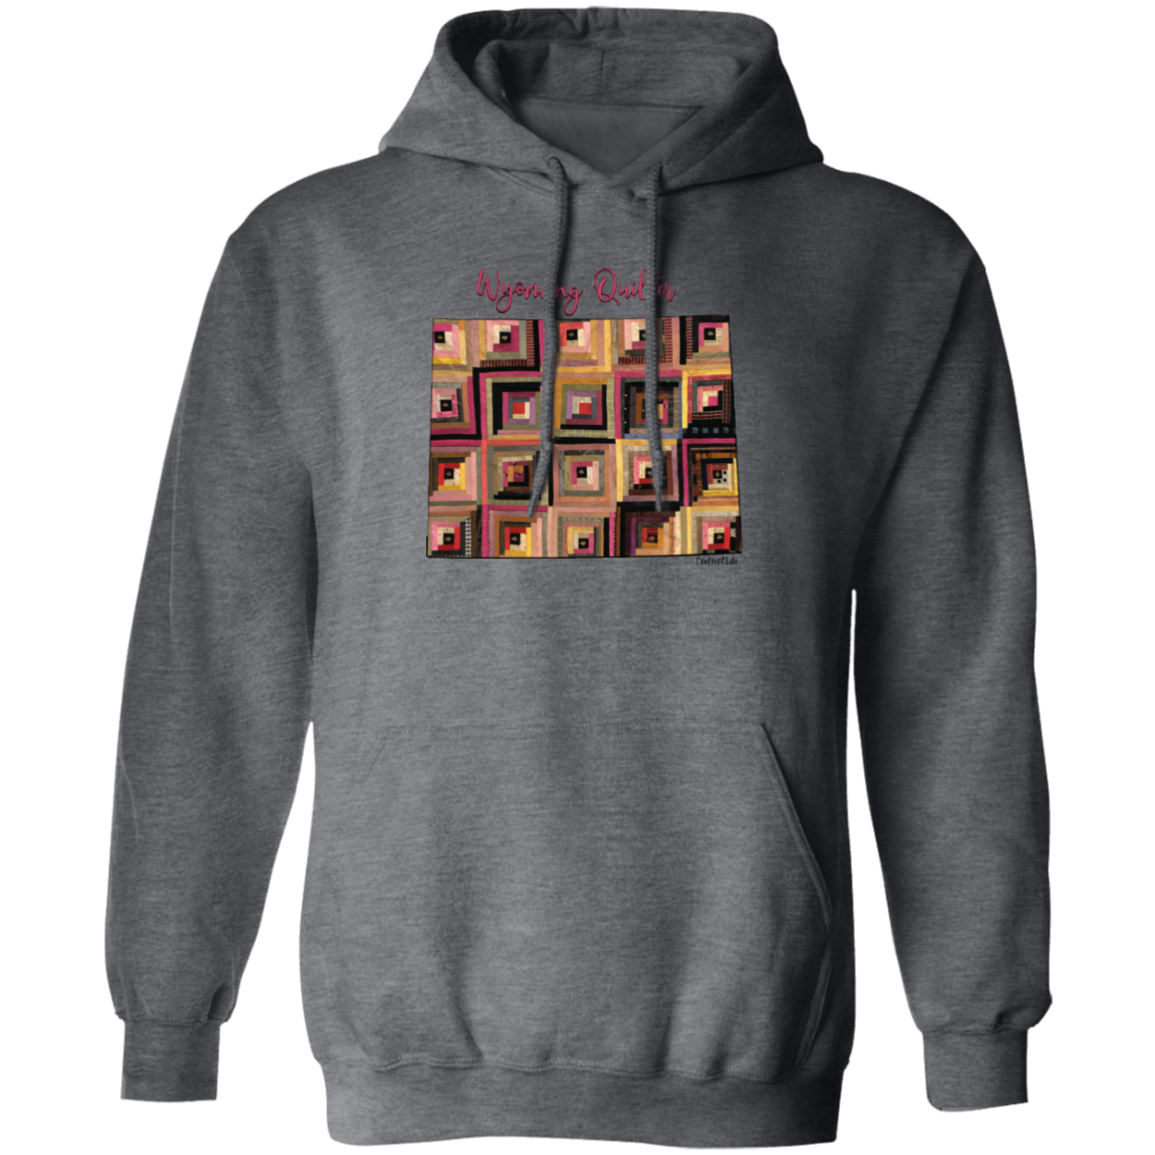 Wyoming Quilter Pullover Hoodie, Gift for Quilting Friends and Family